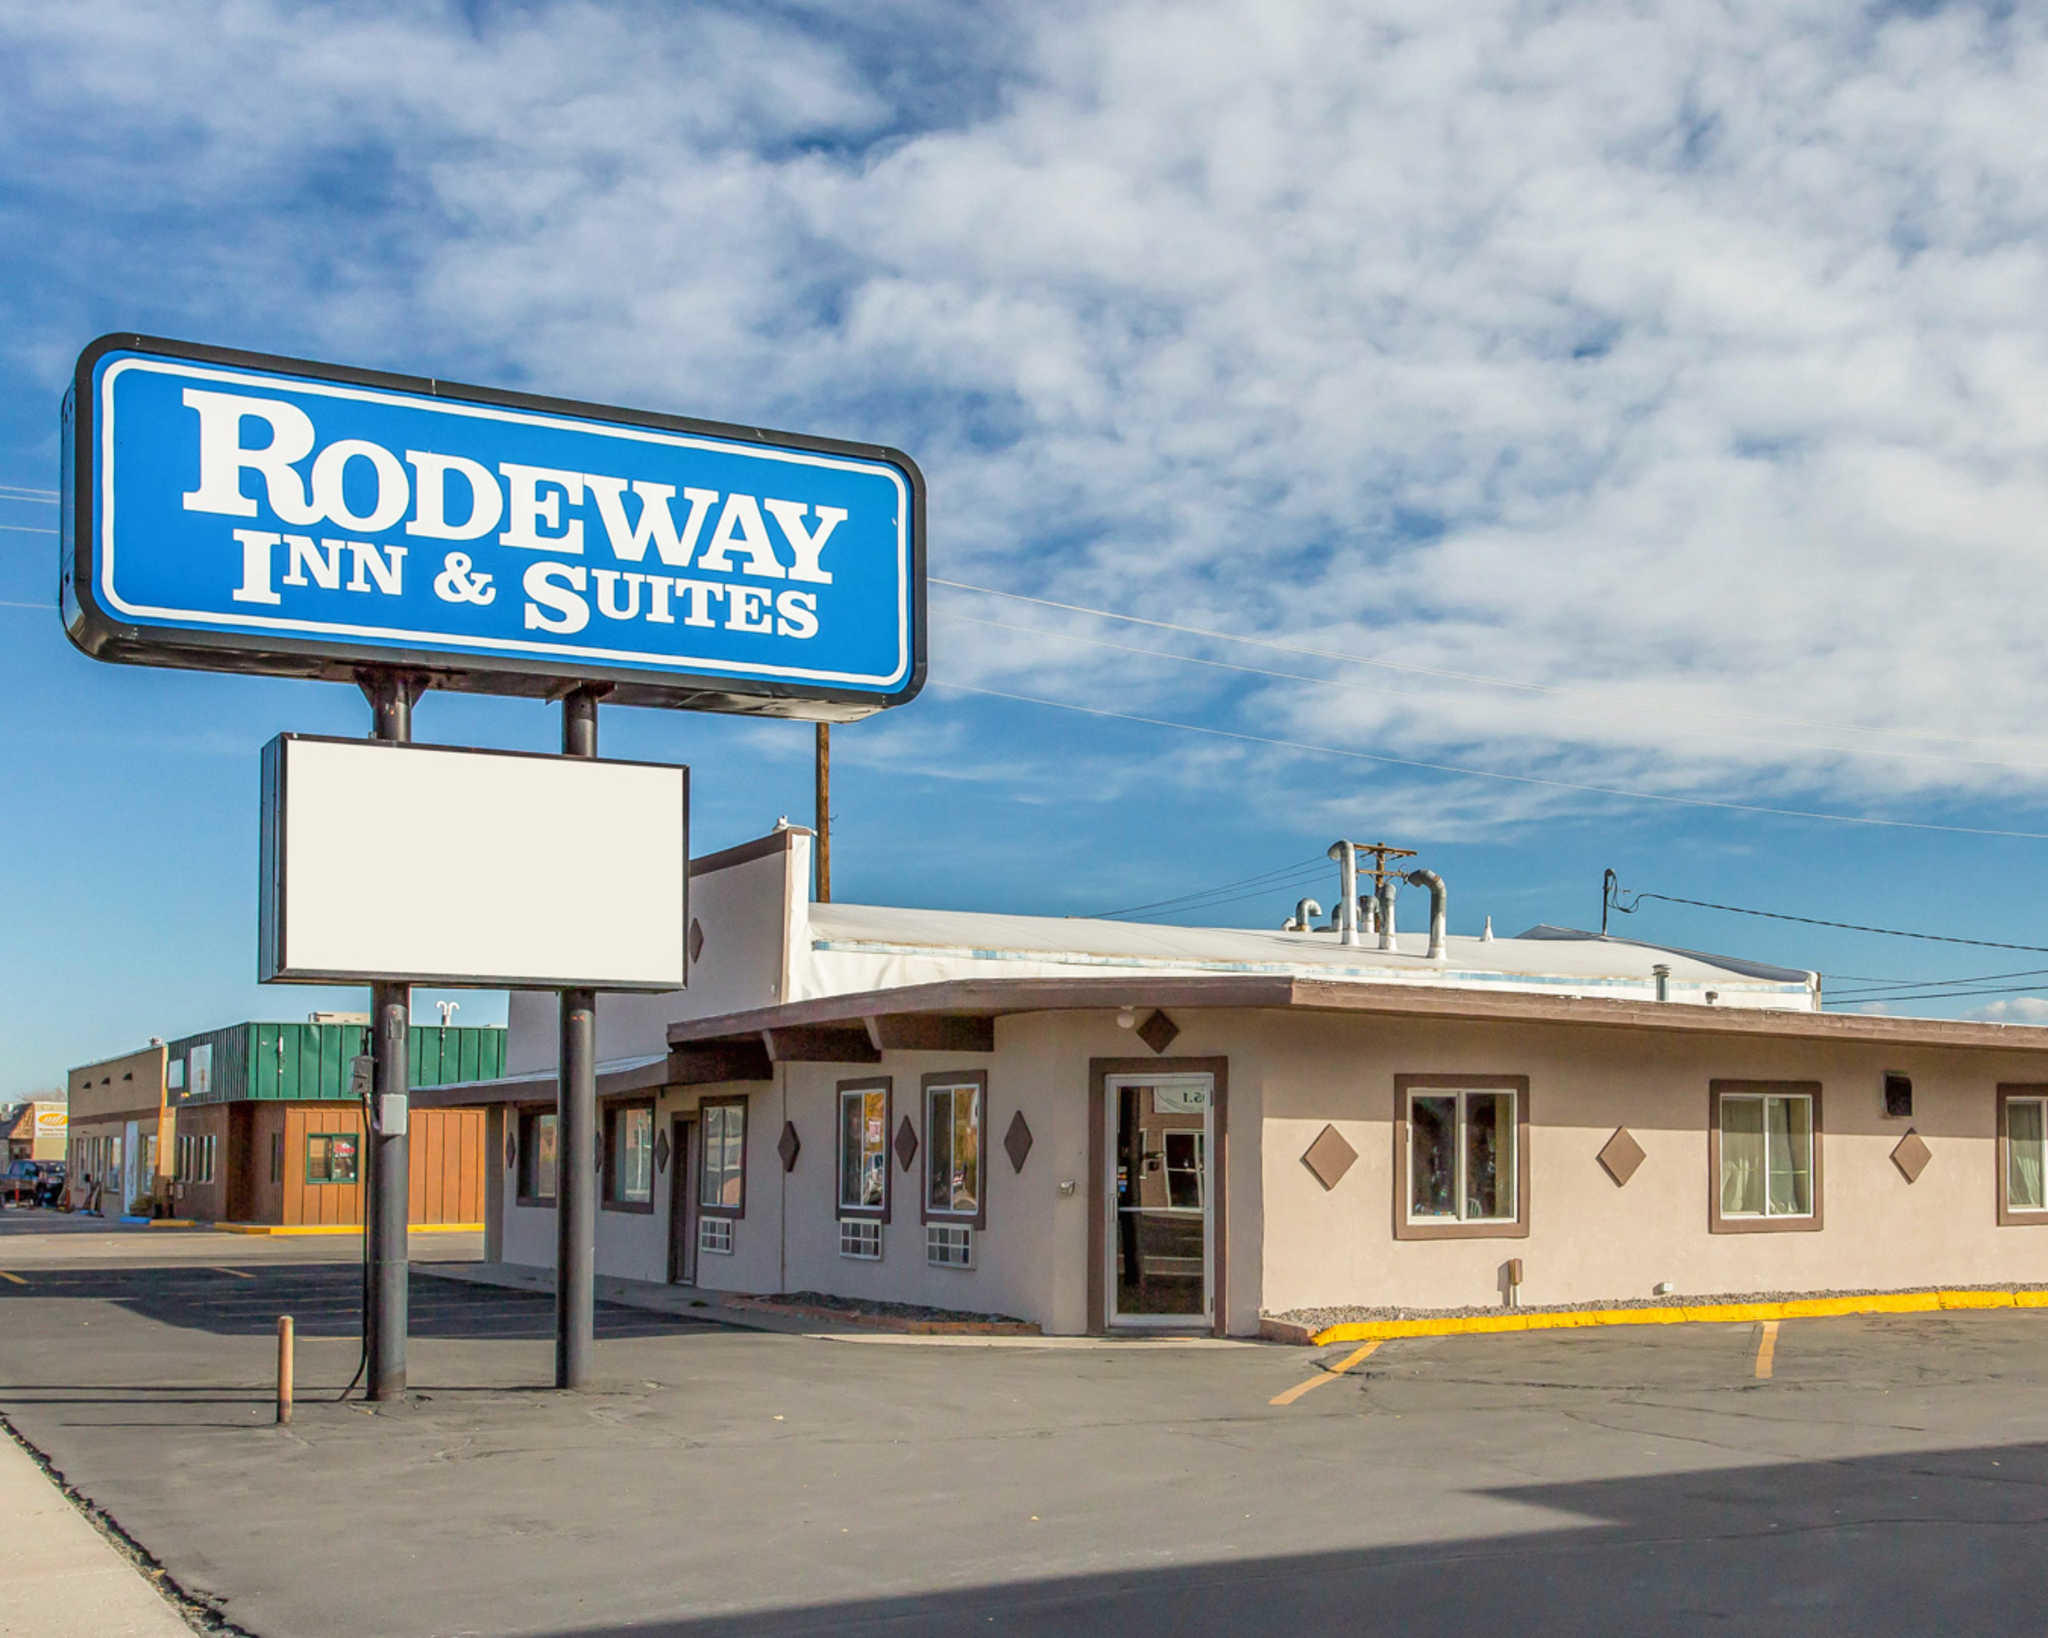 Rodeway Inn & Suites Coupons near me in Riverton, WY 82501 8coupons